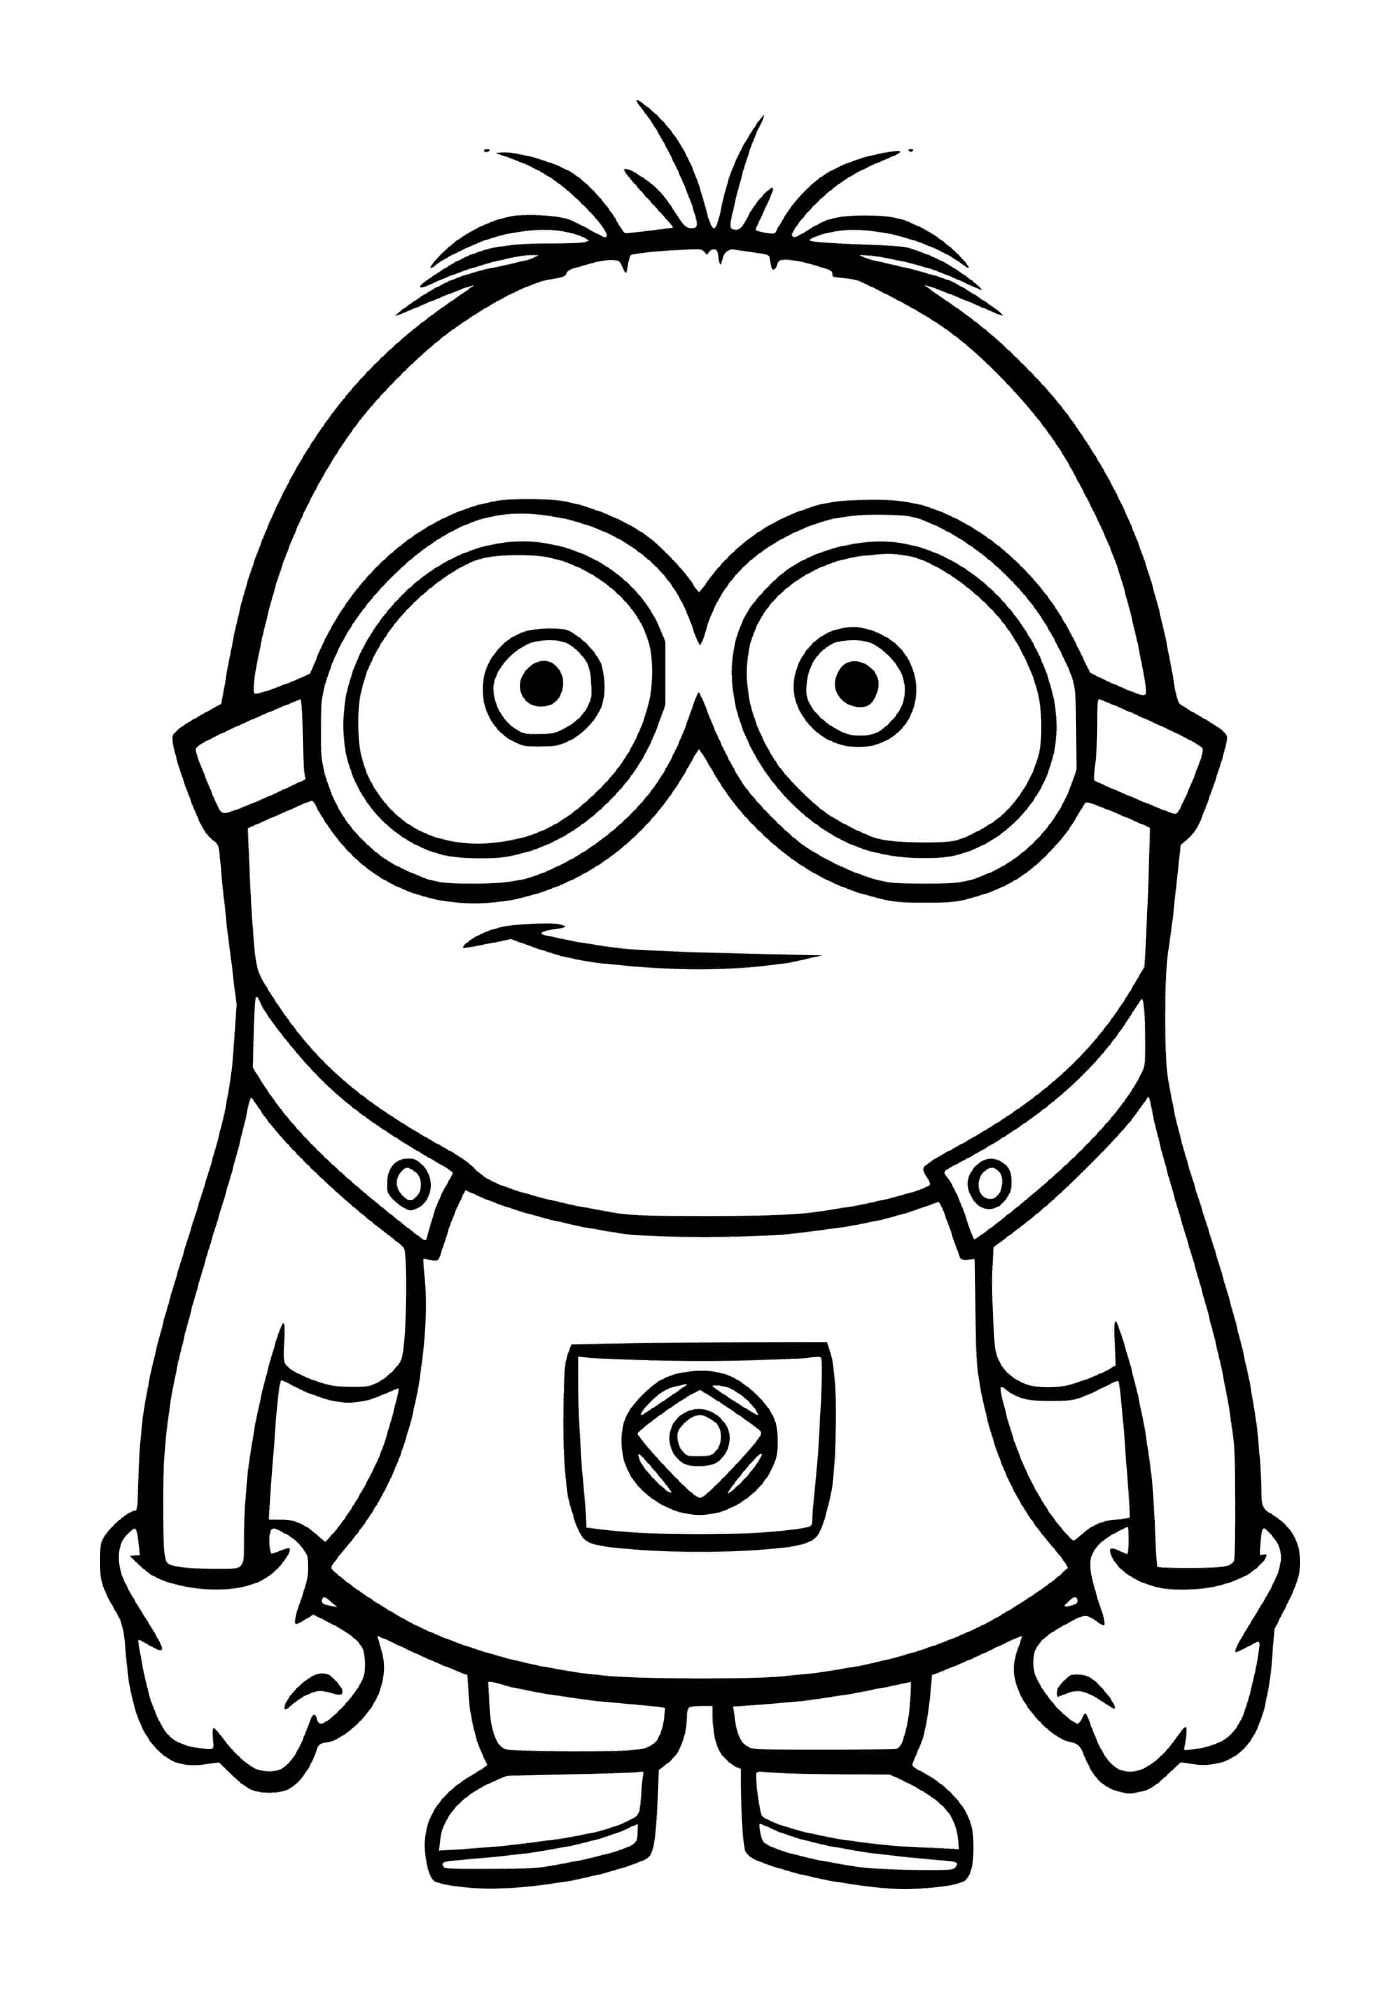  Little Minion with glasses 